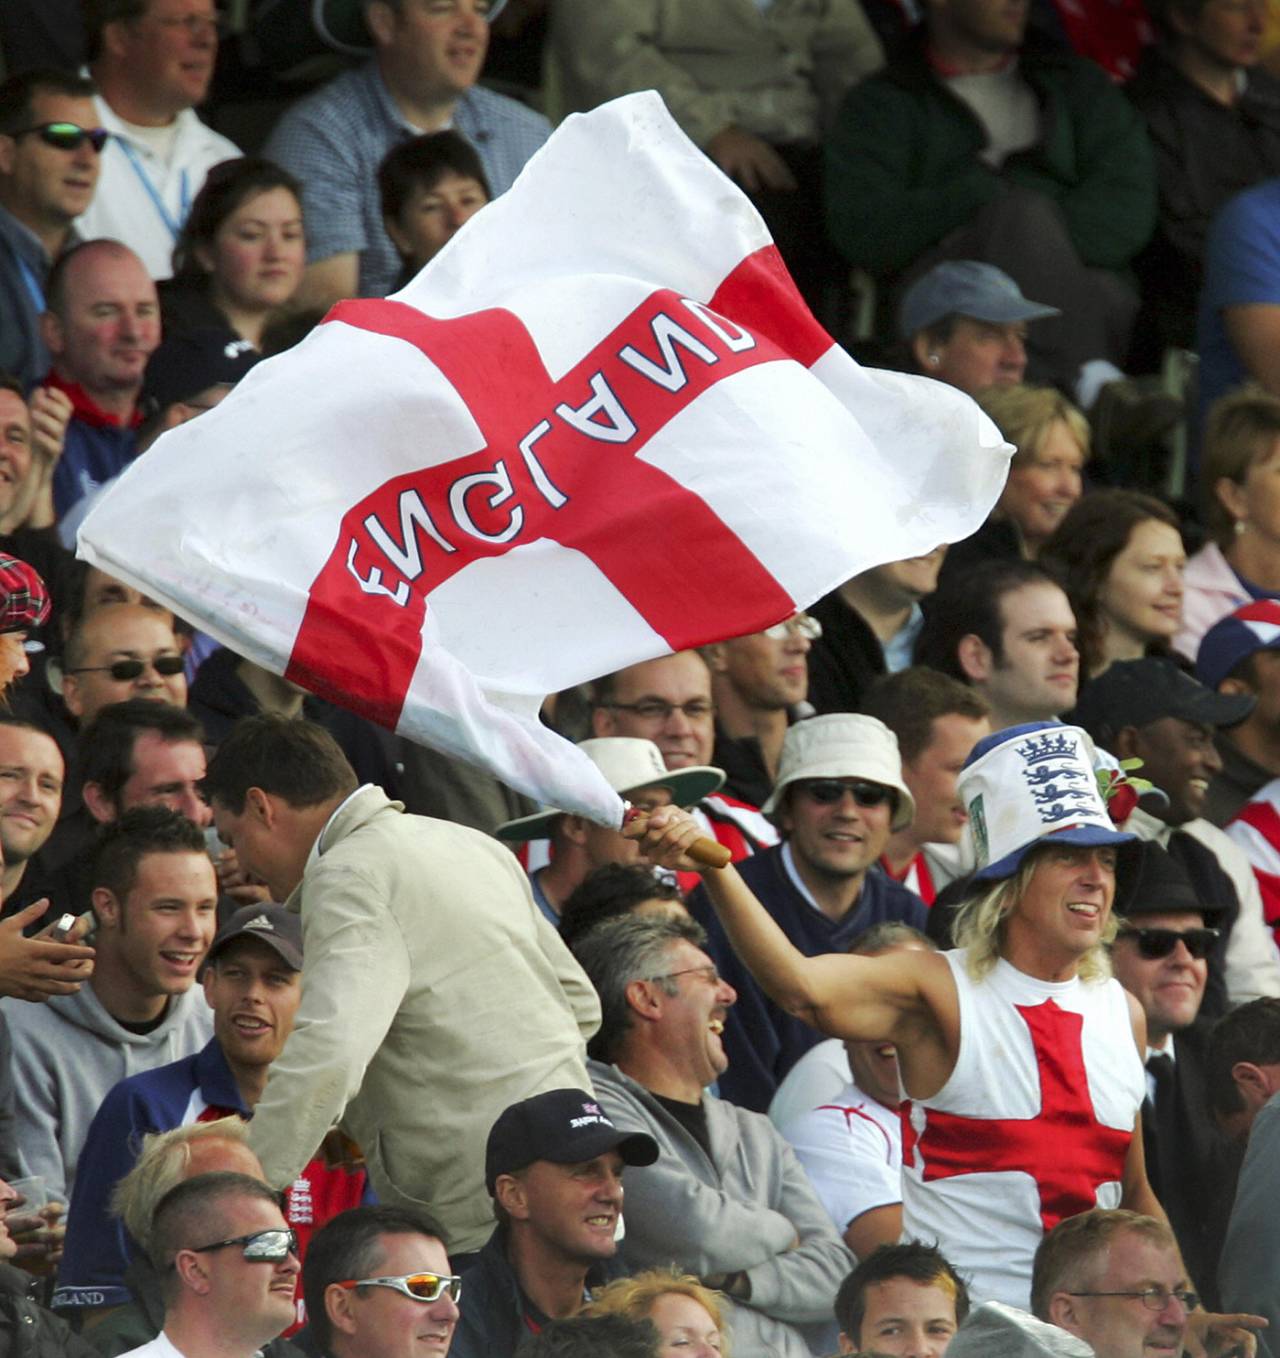 A fan flies the St George's flag in the stands, England v Australia, second Test, day two, Edgbaston, August 5, 2005